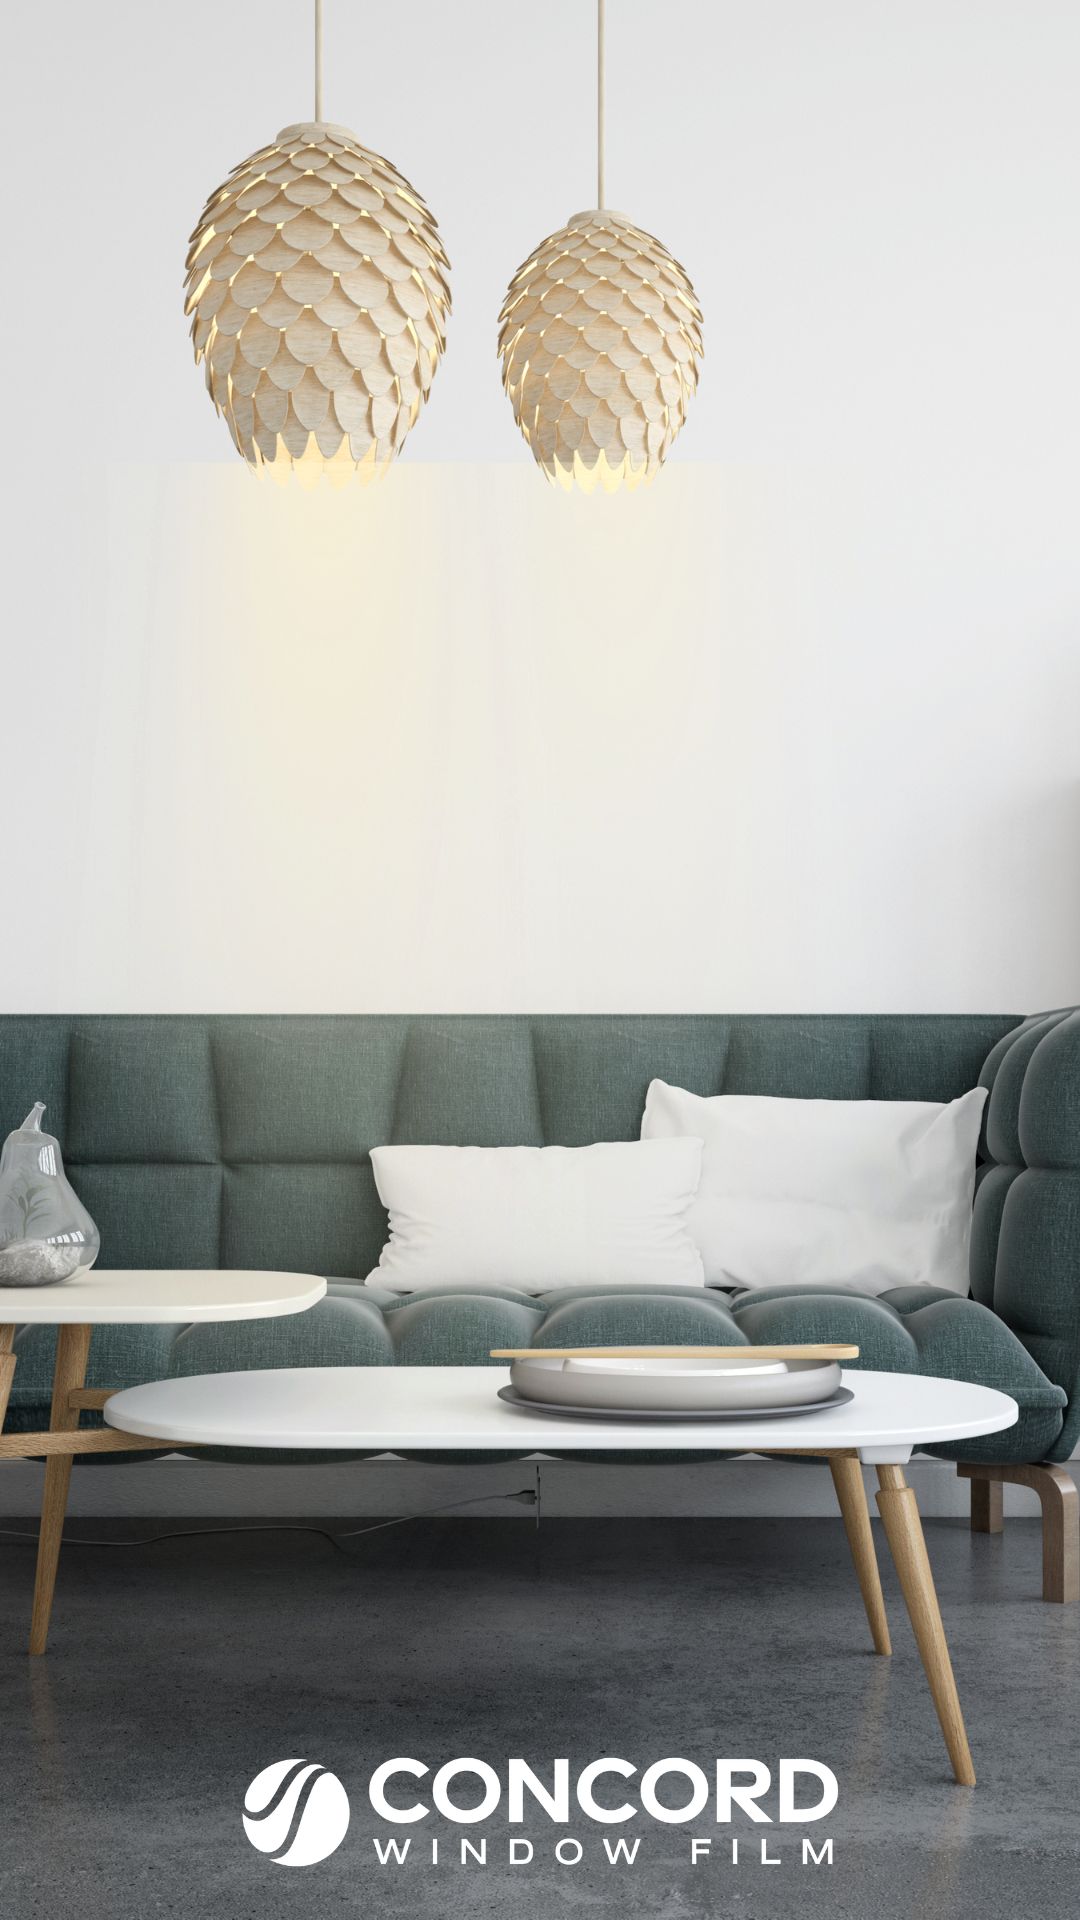 Two hanging light fixtures in a living room